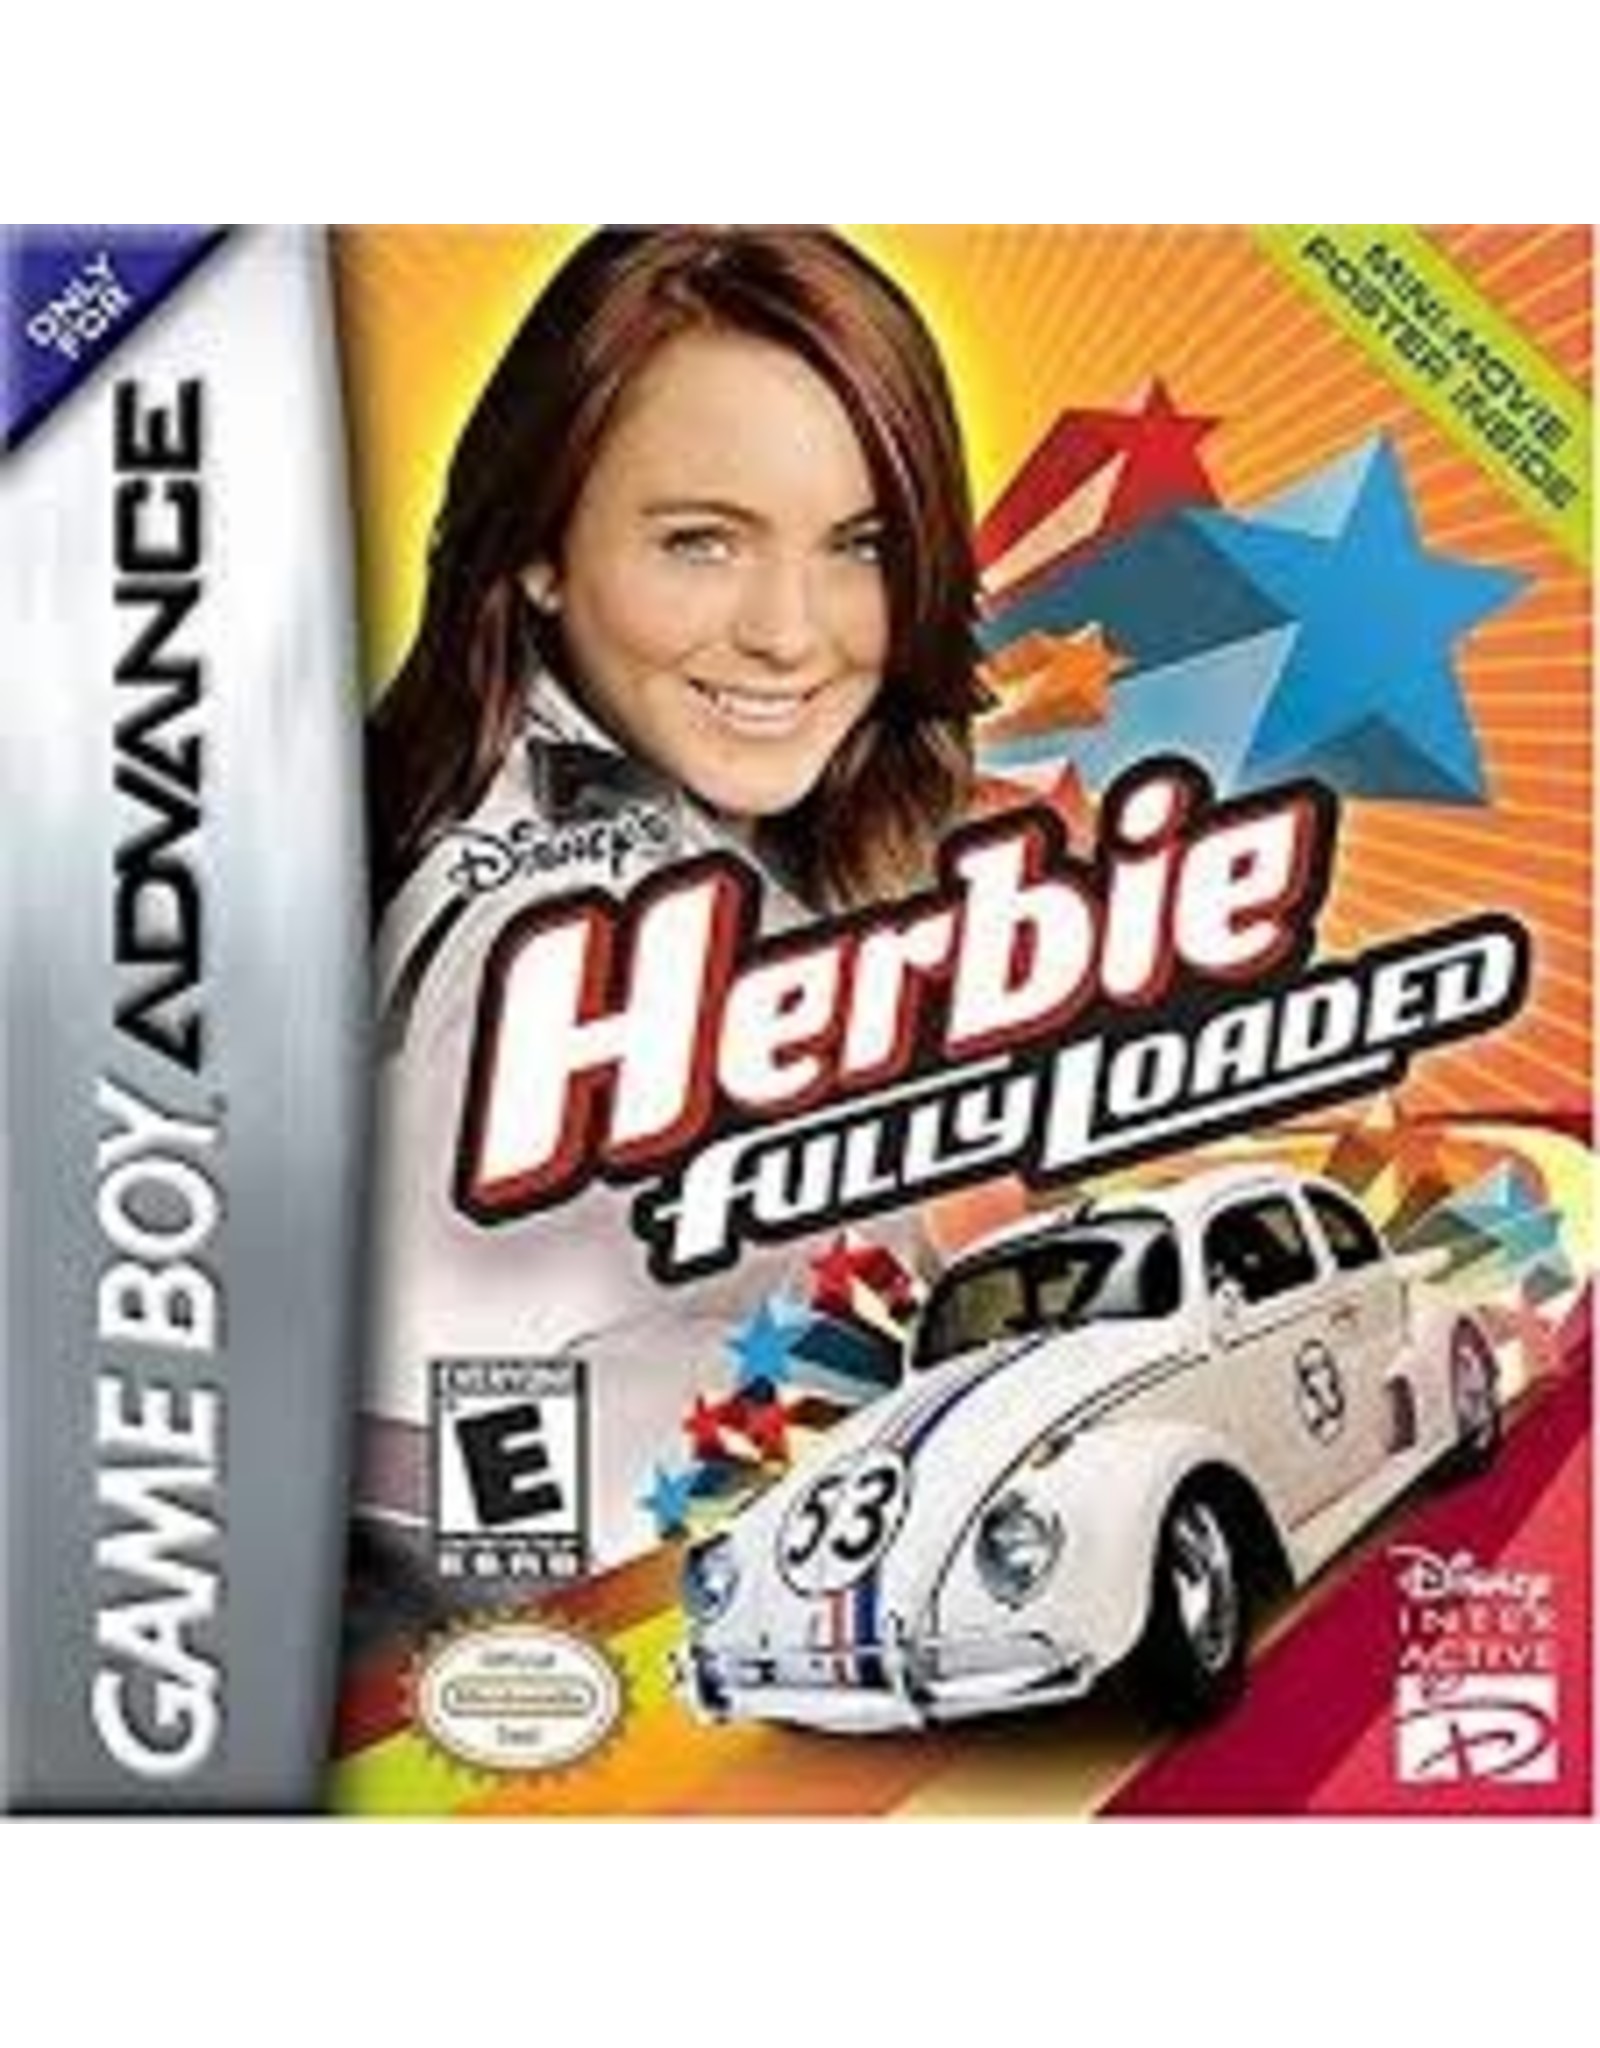 Game Boy Advance Herbie Fully Loaded (Cart Only)